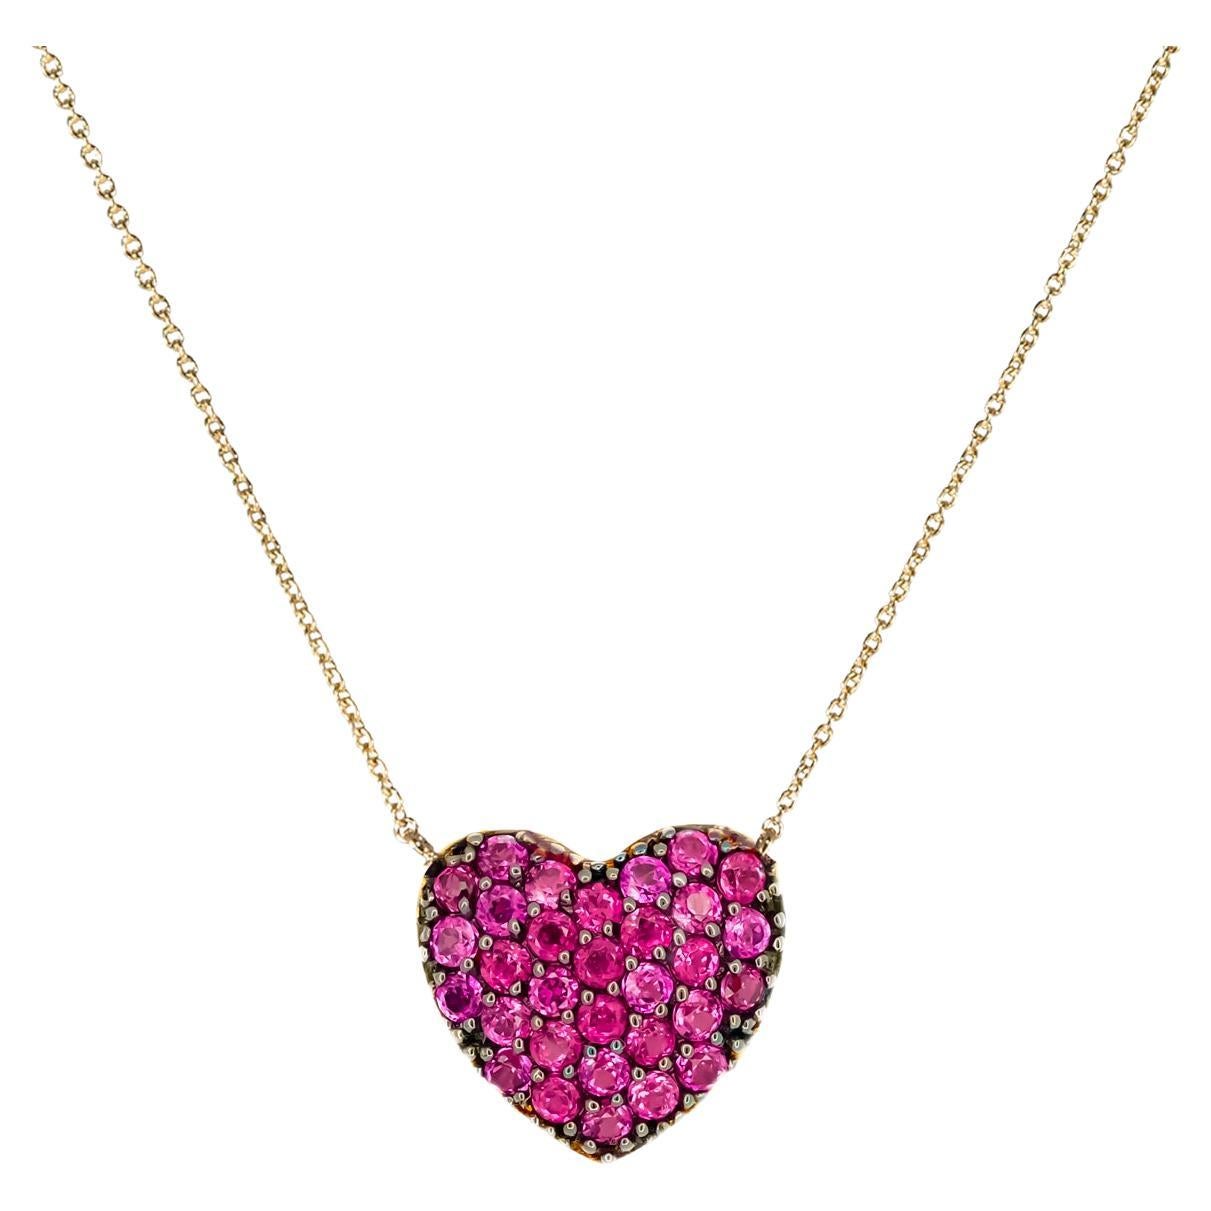 14k Solid Gold heart Pendant necklace. Heart necklace for women.